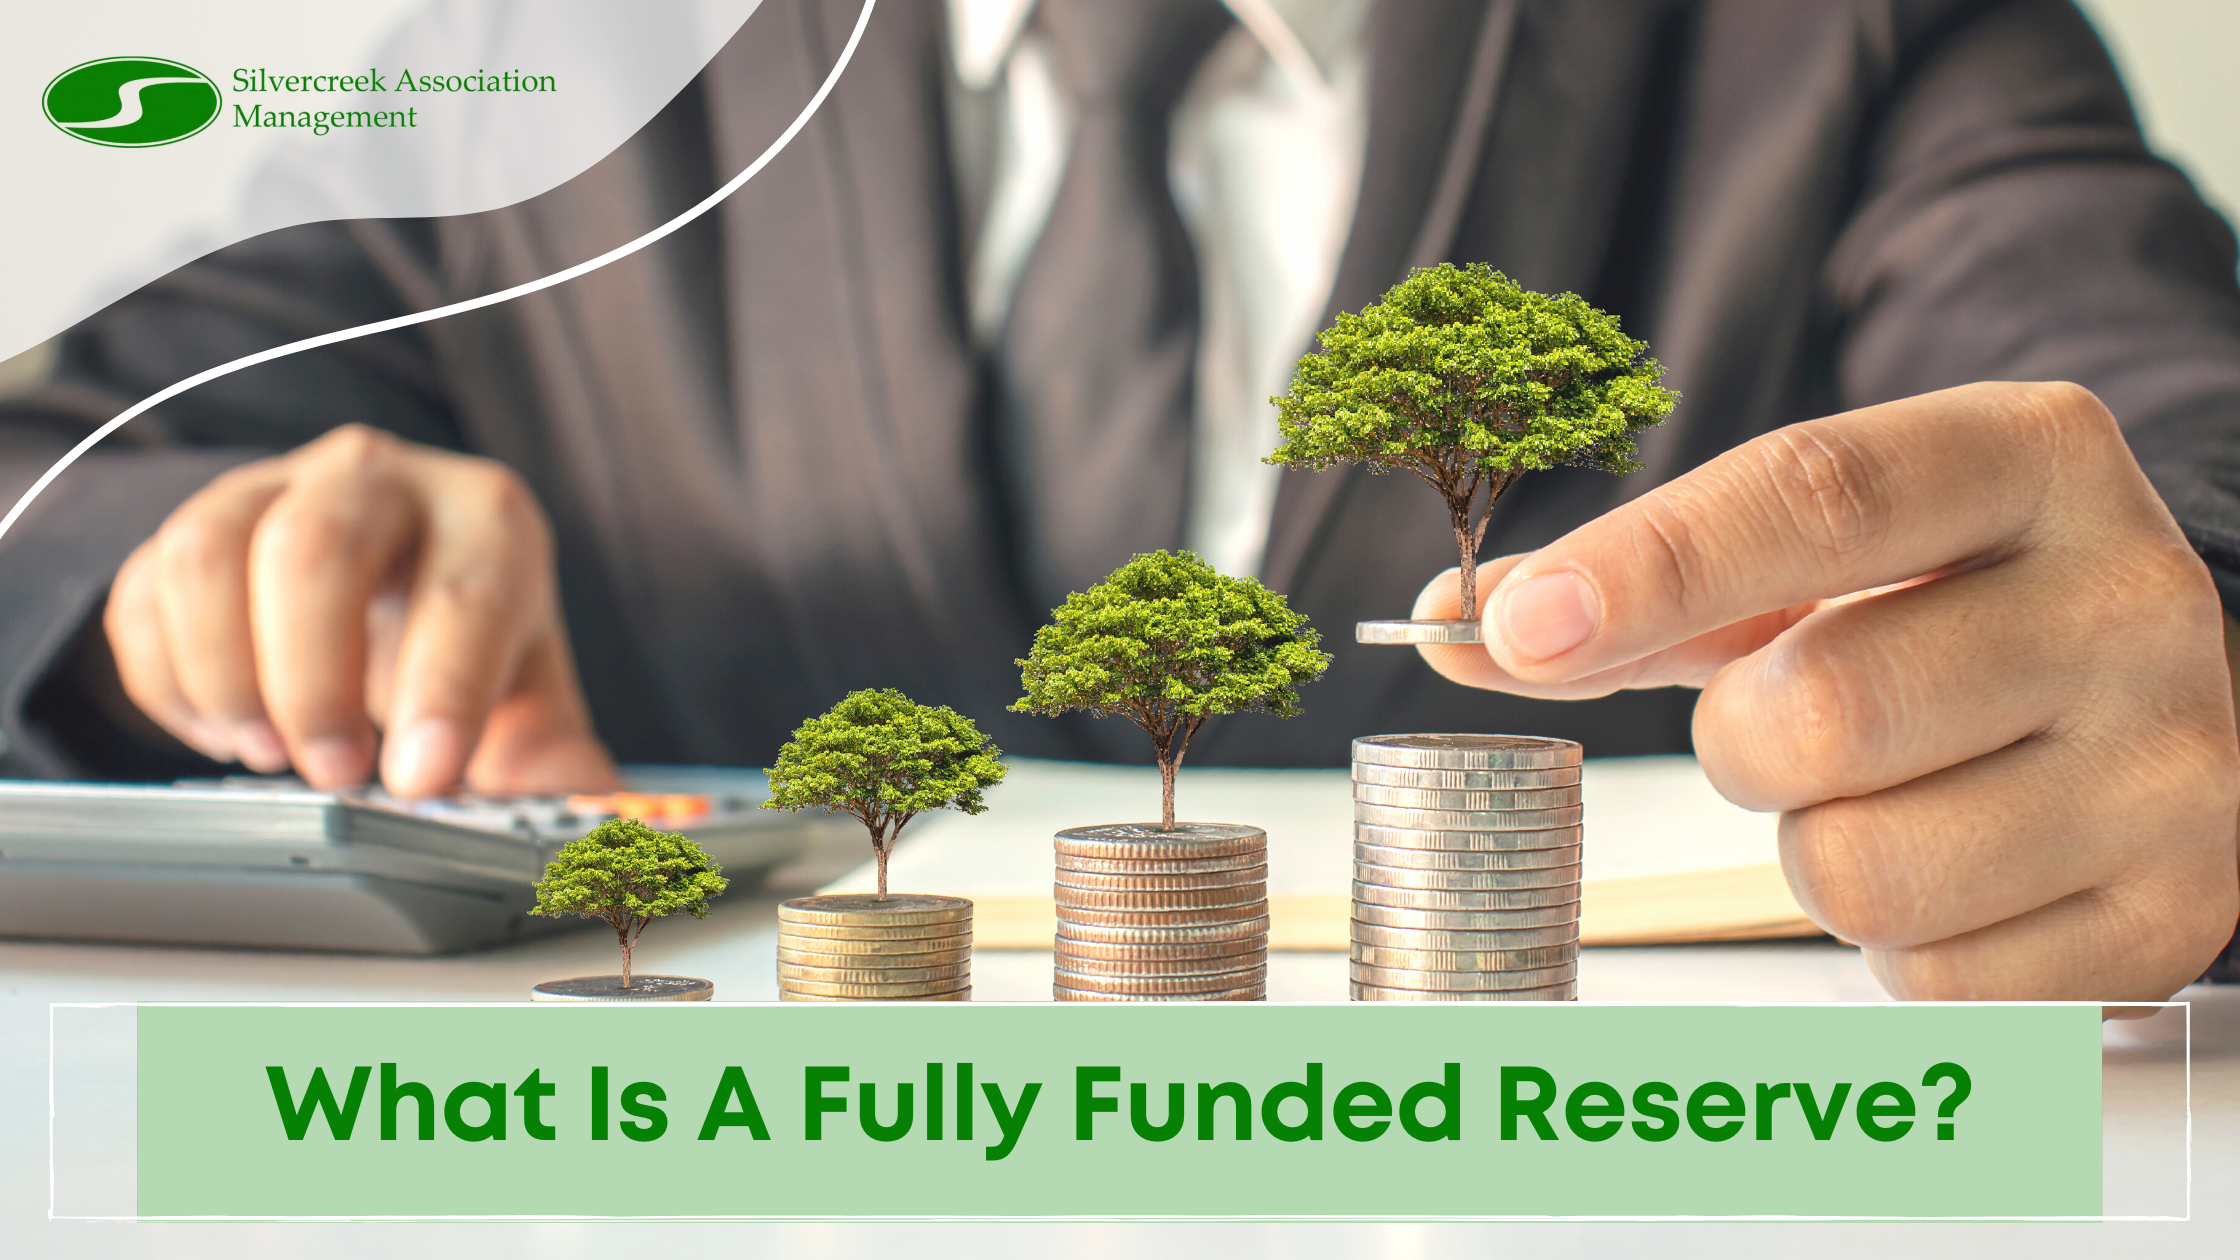 What Is A Fully Funded Reserve?